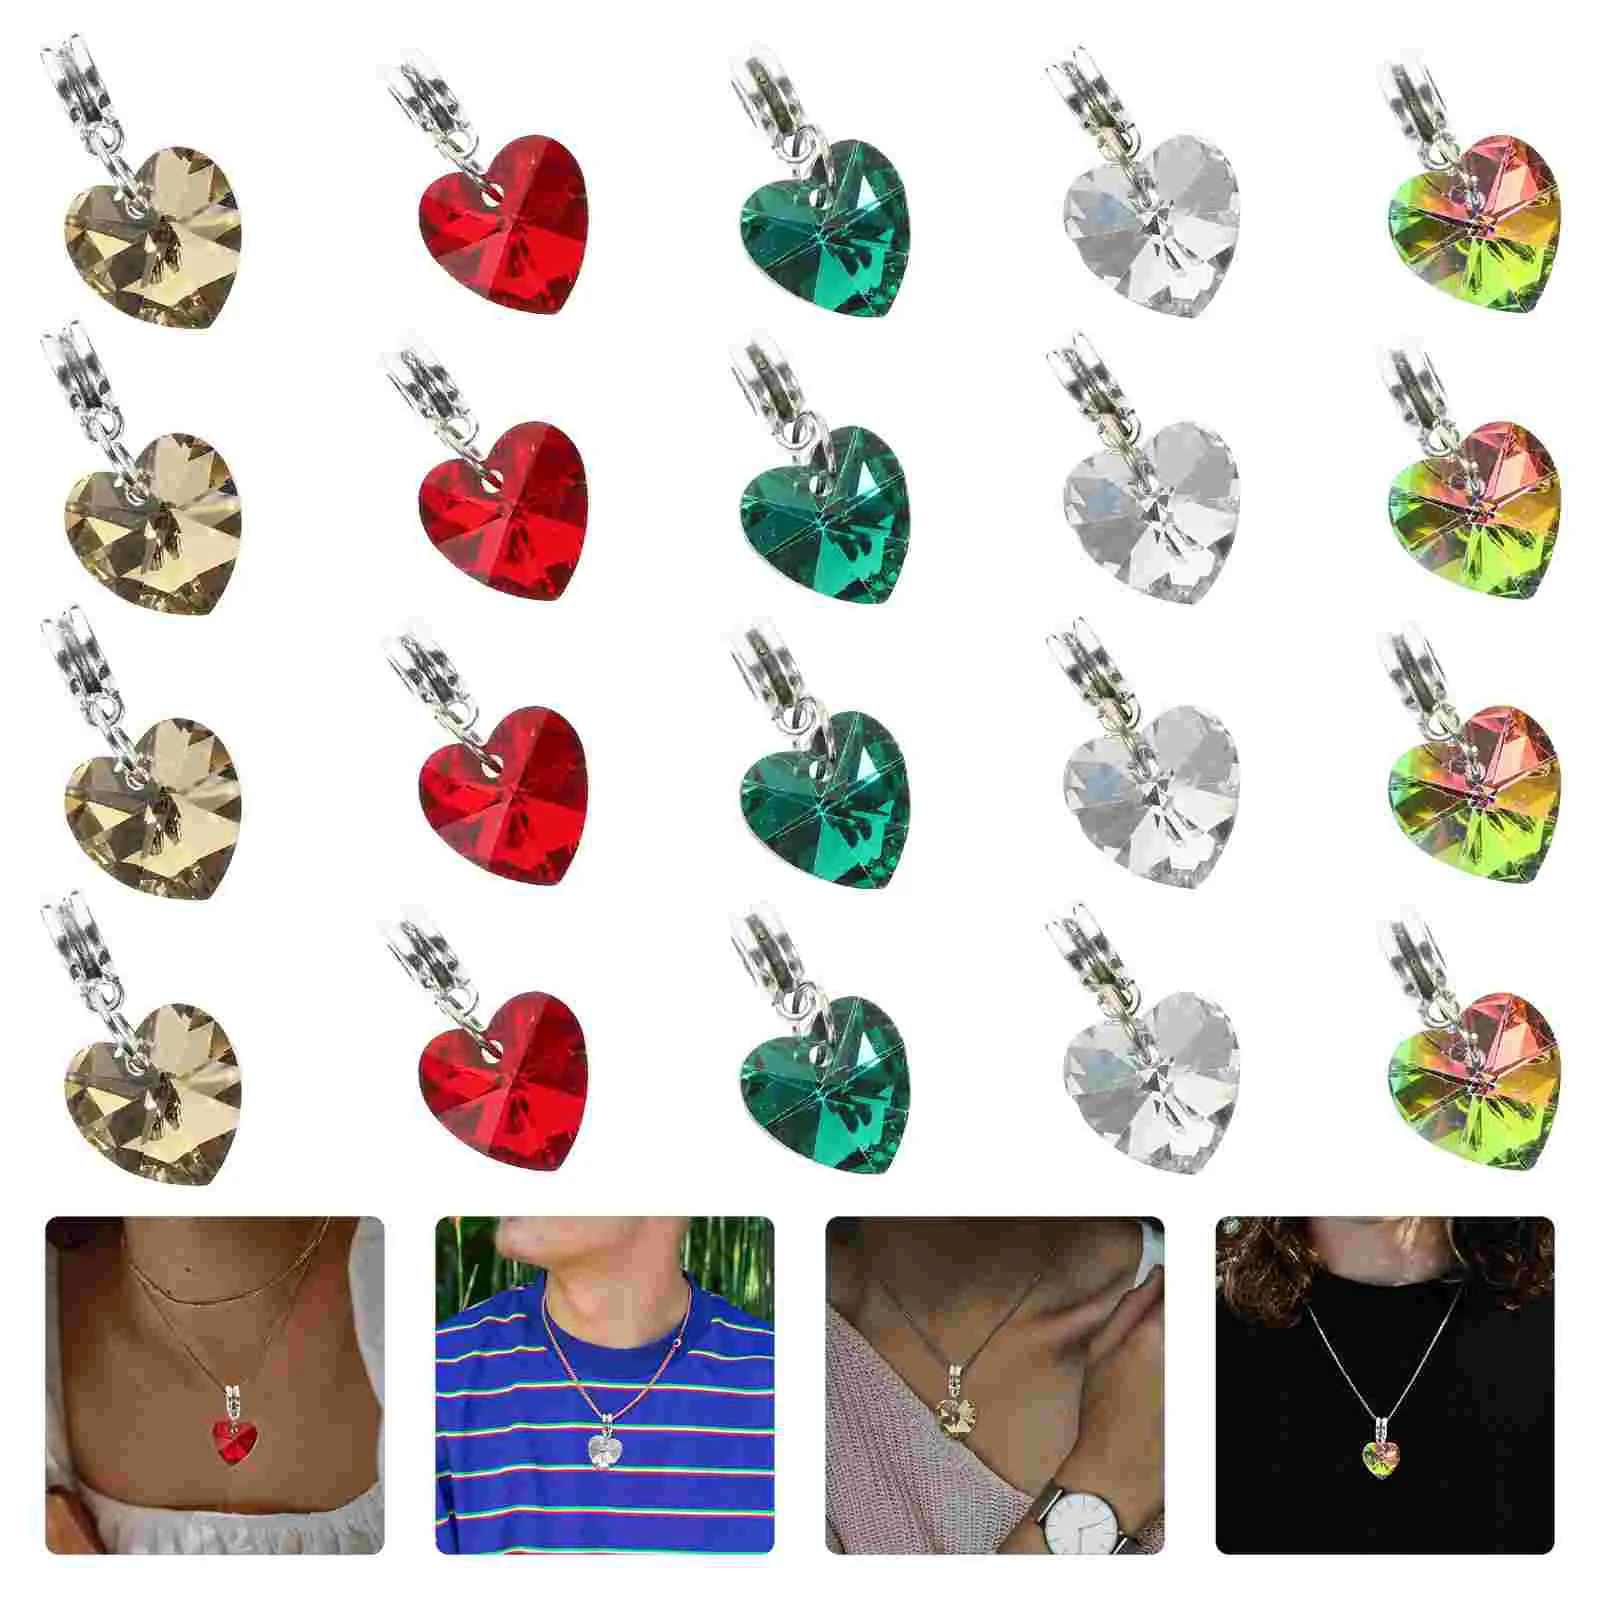 50 Pcs Love Heart Charms Locket Necklace Heart Necklace Crystal Beads Charms Heart Pendant Heart Shaped Earrings